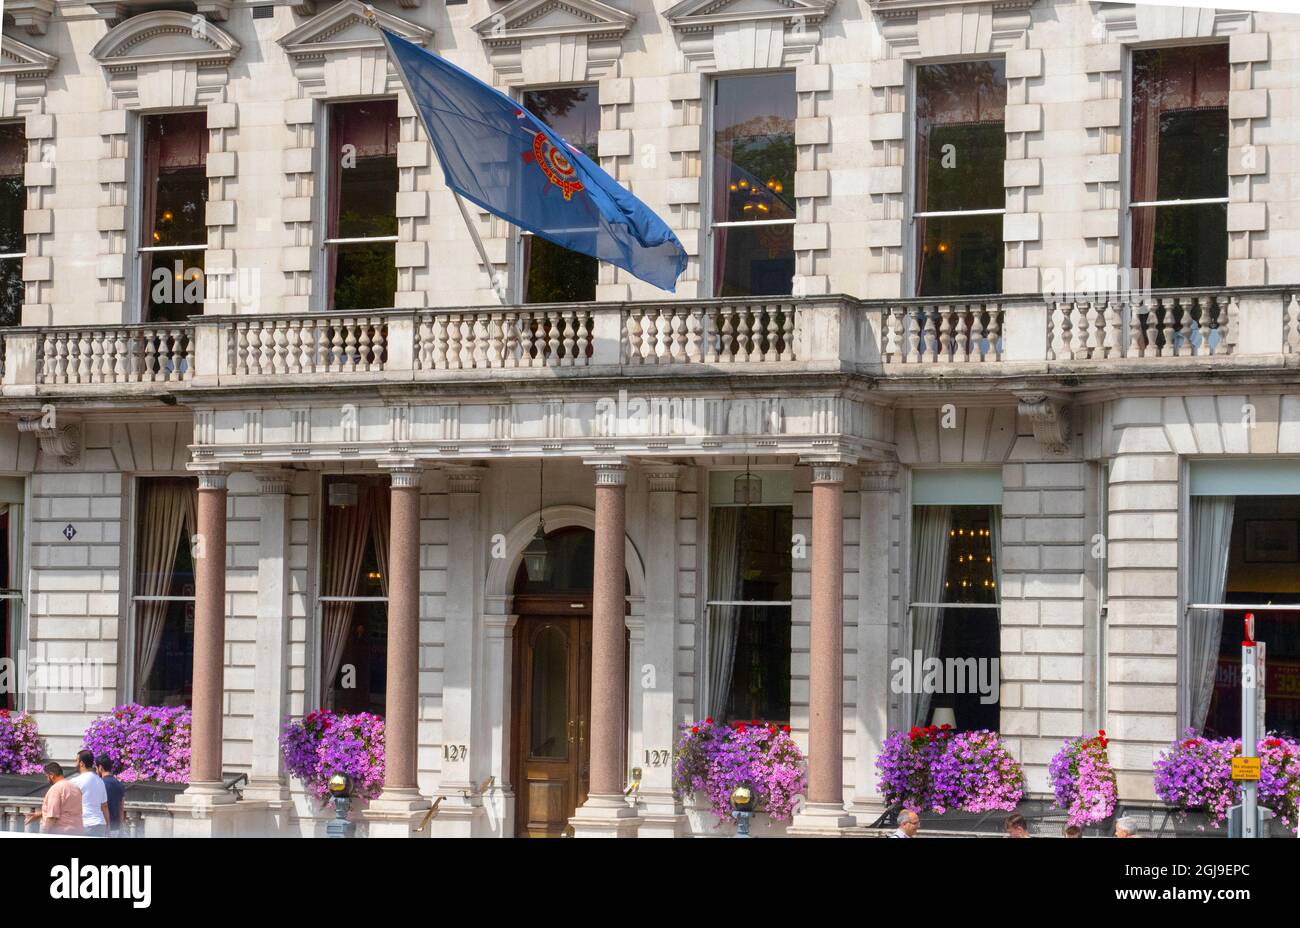 London, one finds this hotel with beautiful cineraria flower boxes in the windows. Stock Photo